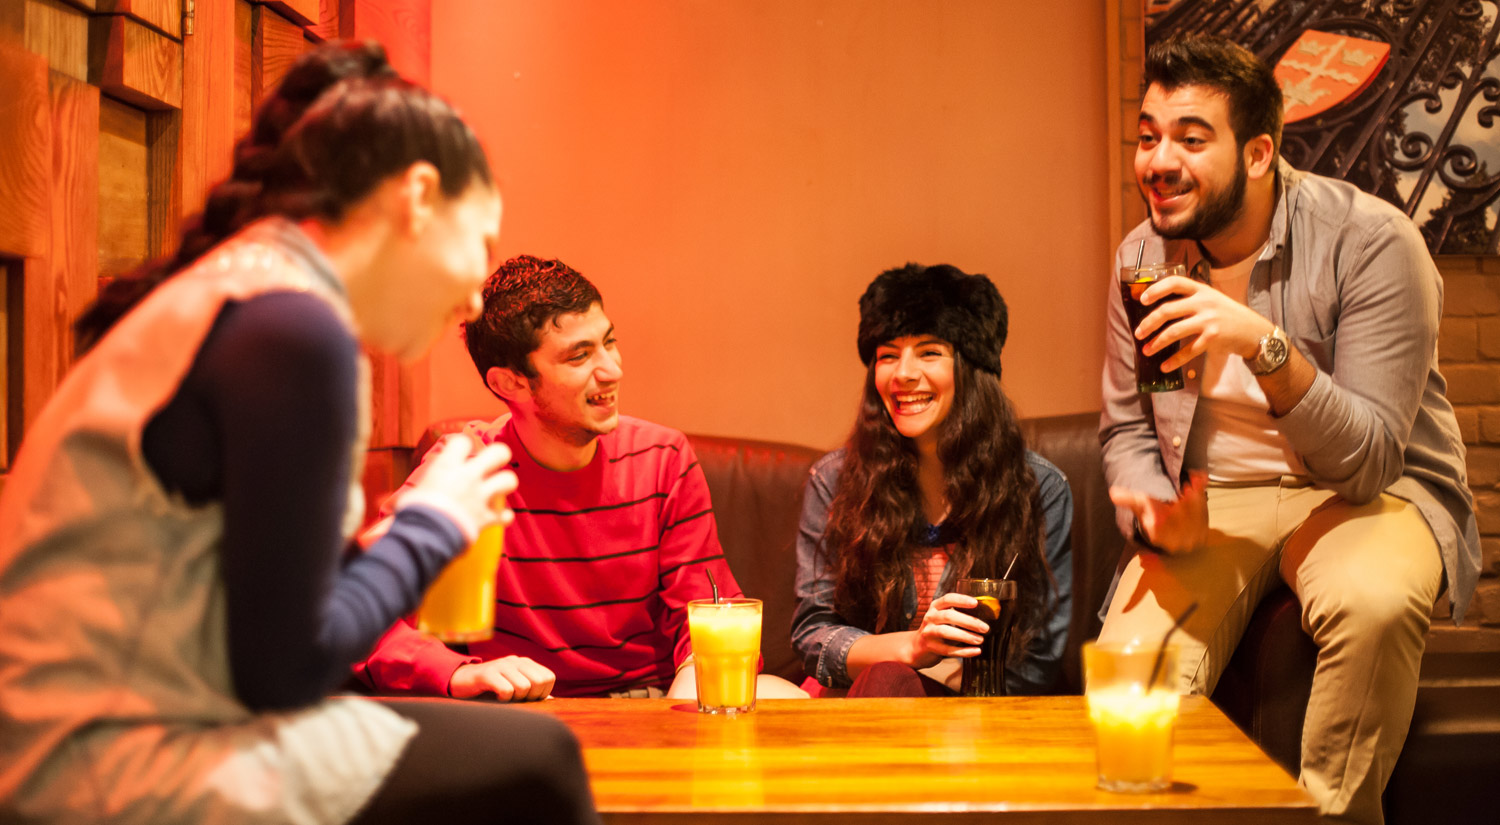 There are plenty of places to meet-up outside your studies